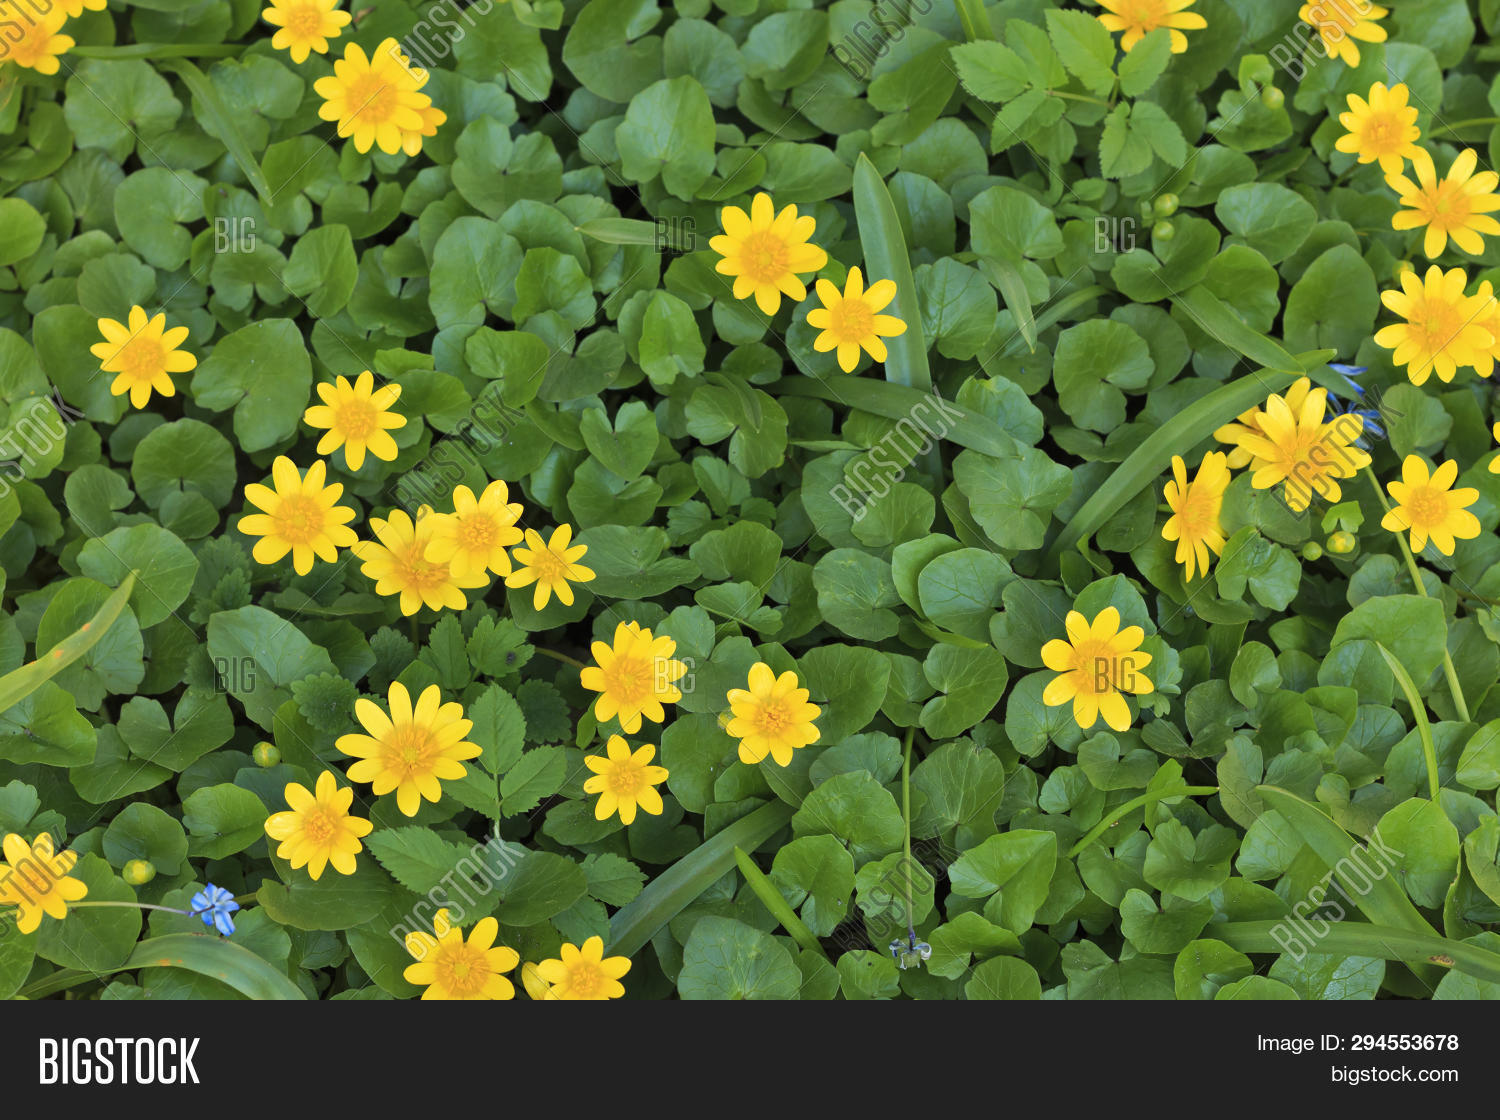 Free Download Green Field Spring Image Photo Free Trial Bigstock